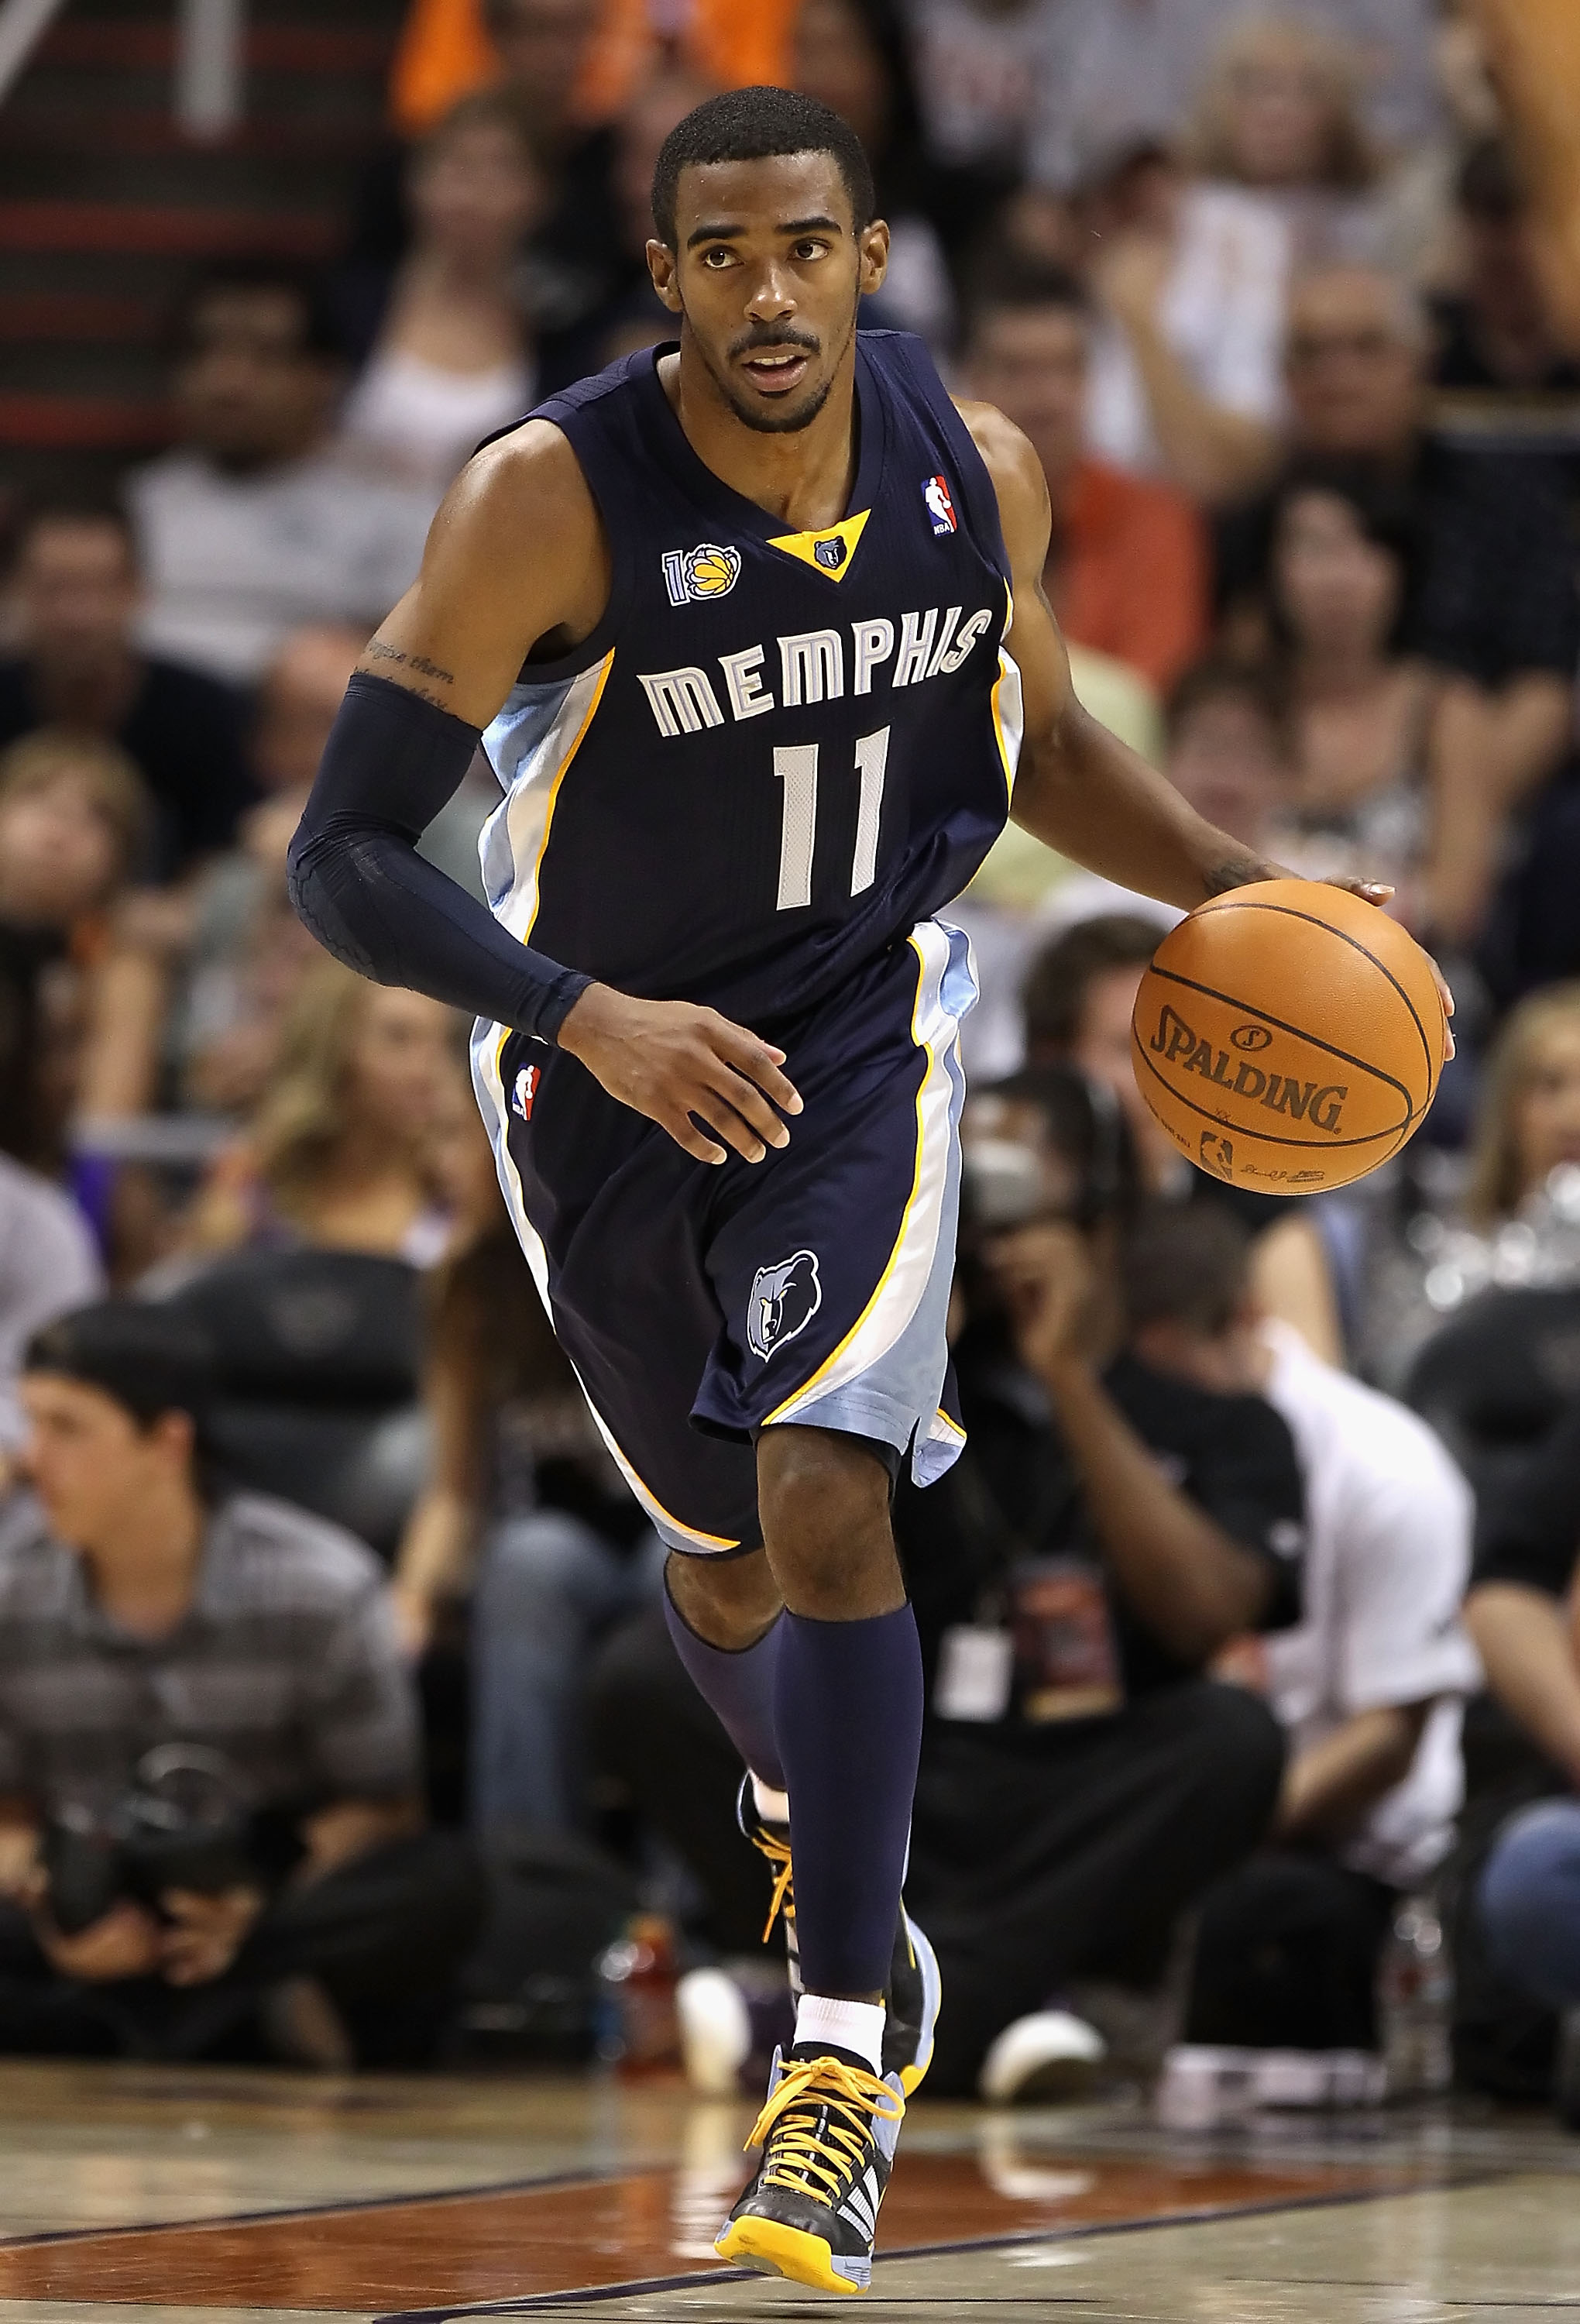 PHOENIX - NOVEMBER 05:  Mike Conley #11 of the Memphis Grizzlies handles the ball during the NBA game against the Phoenix Suns at US Airways Center on November 5, 2010 in Phoenix, Arizona. NOTE TO USER: User expressly acknowledges and agrees that, by down